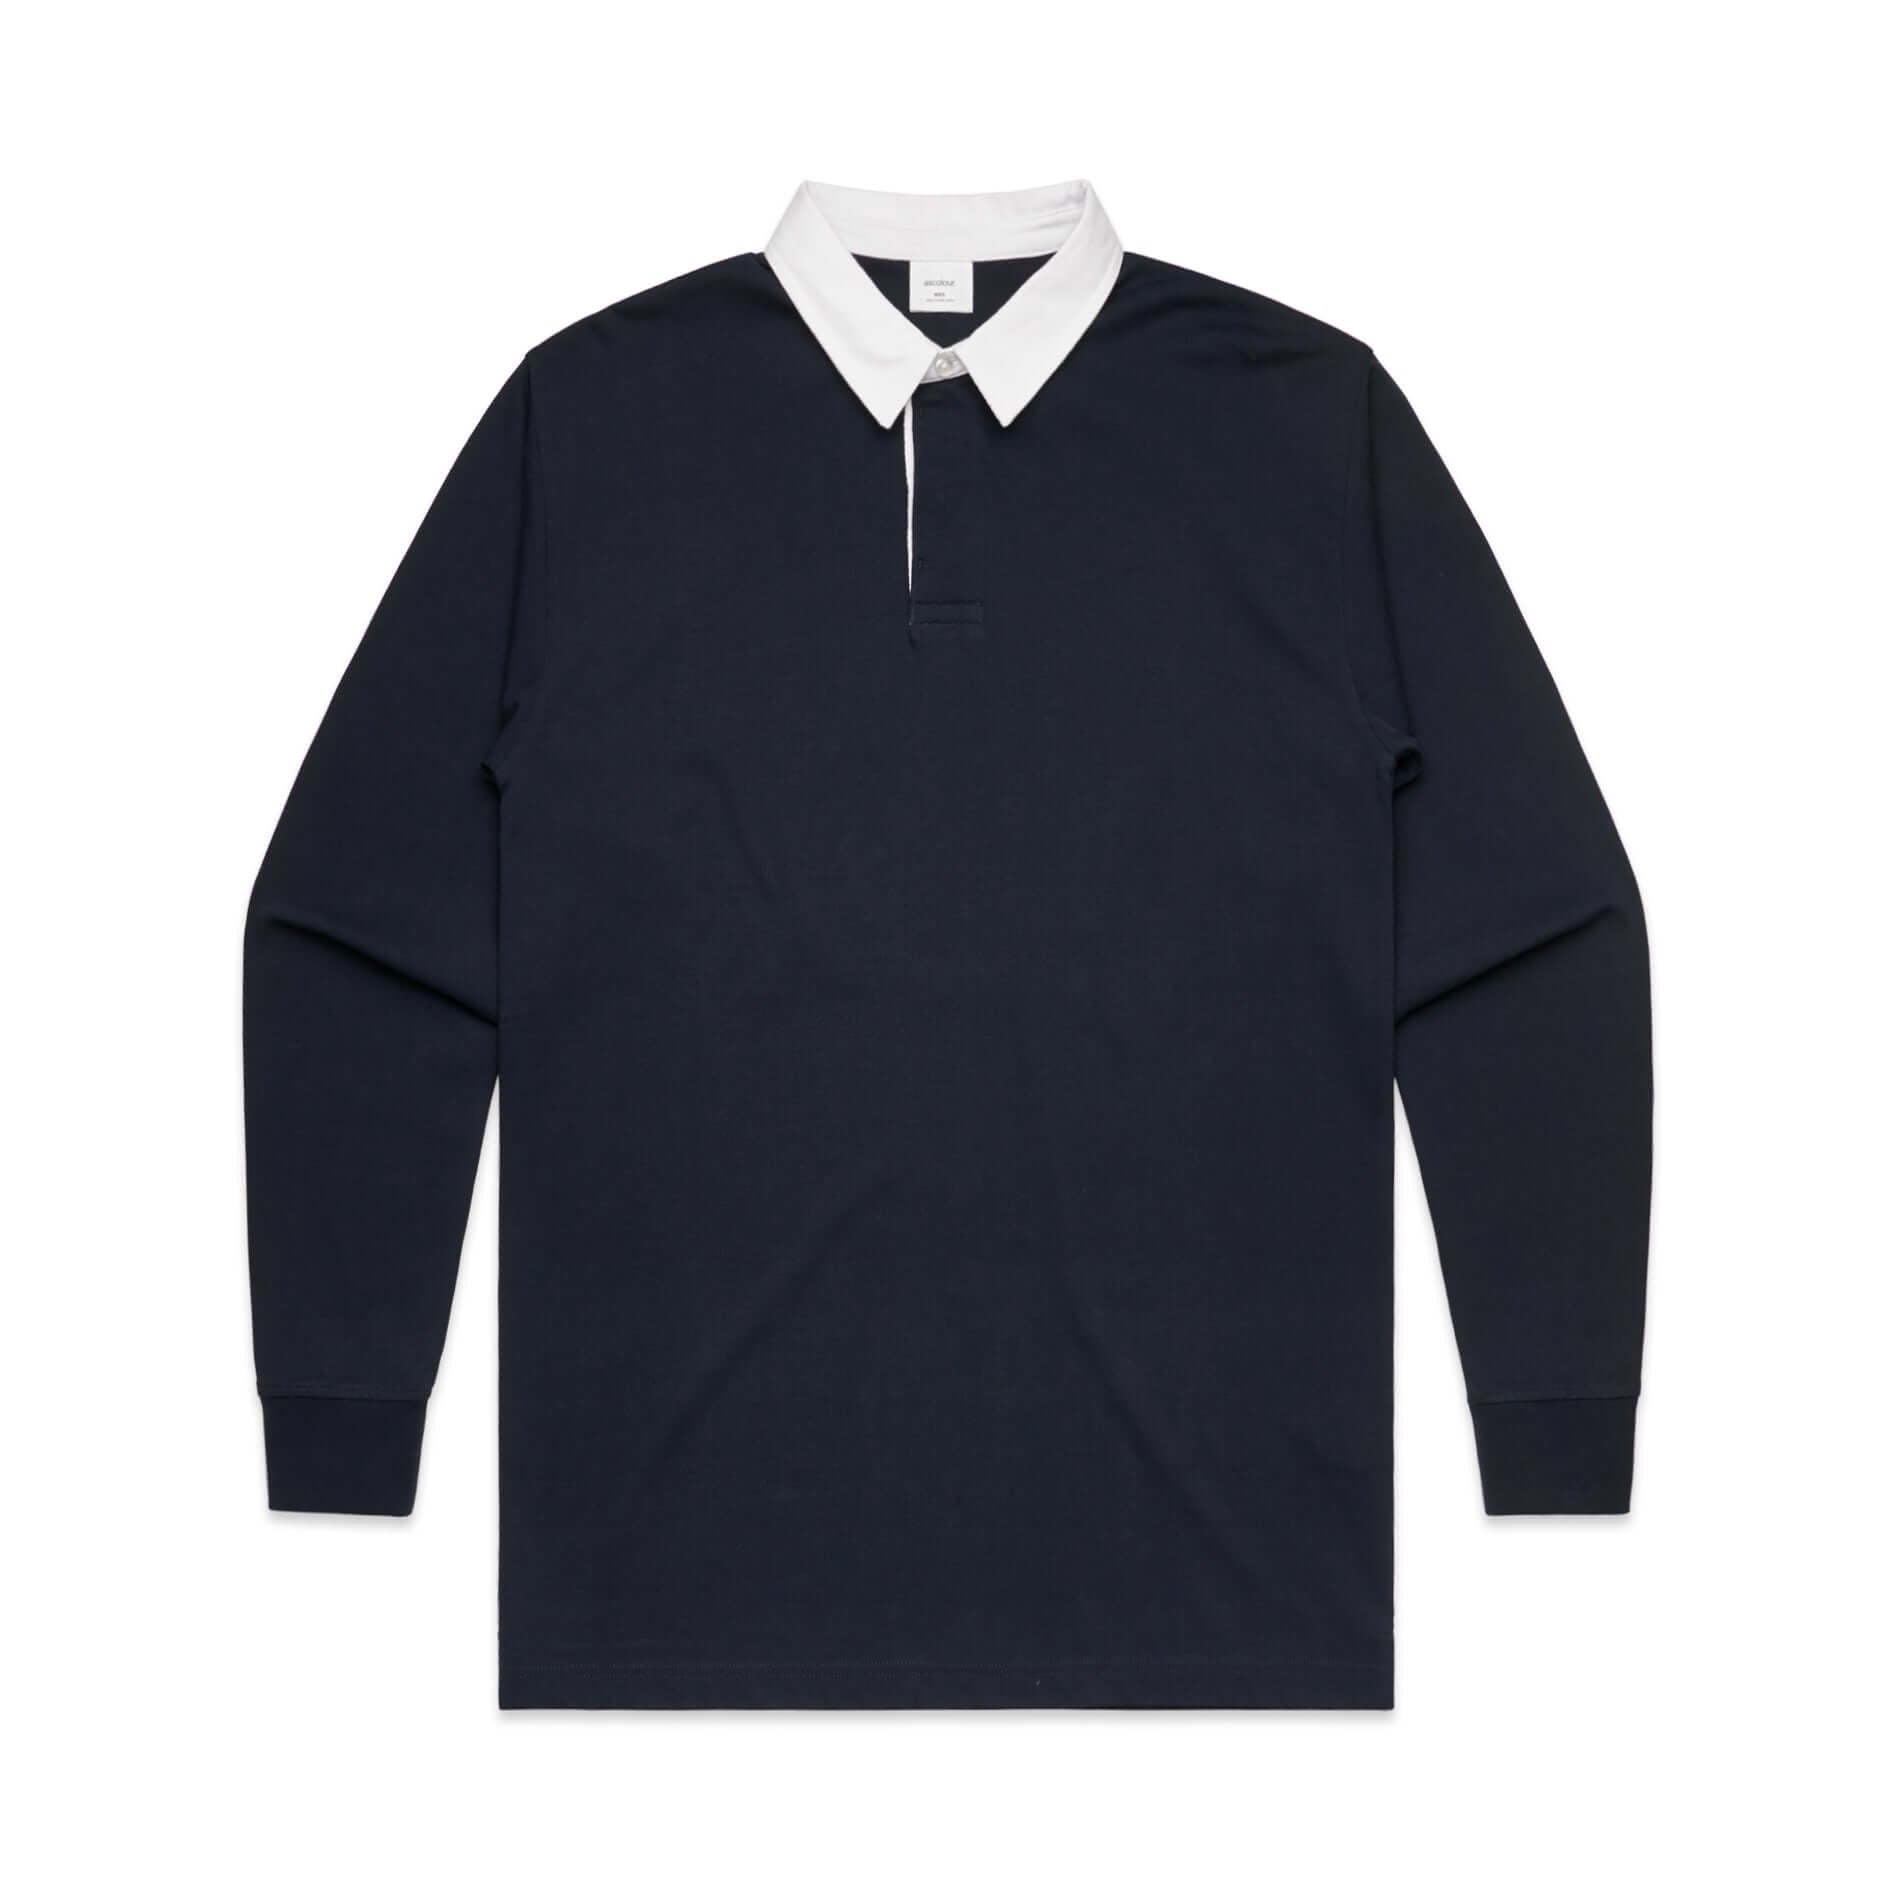 AS Colour RUGBY JERSEY - Navy